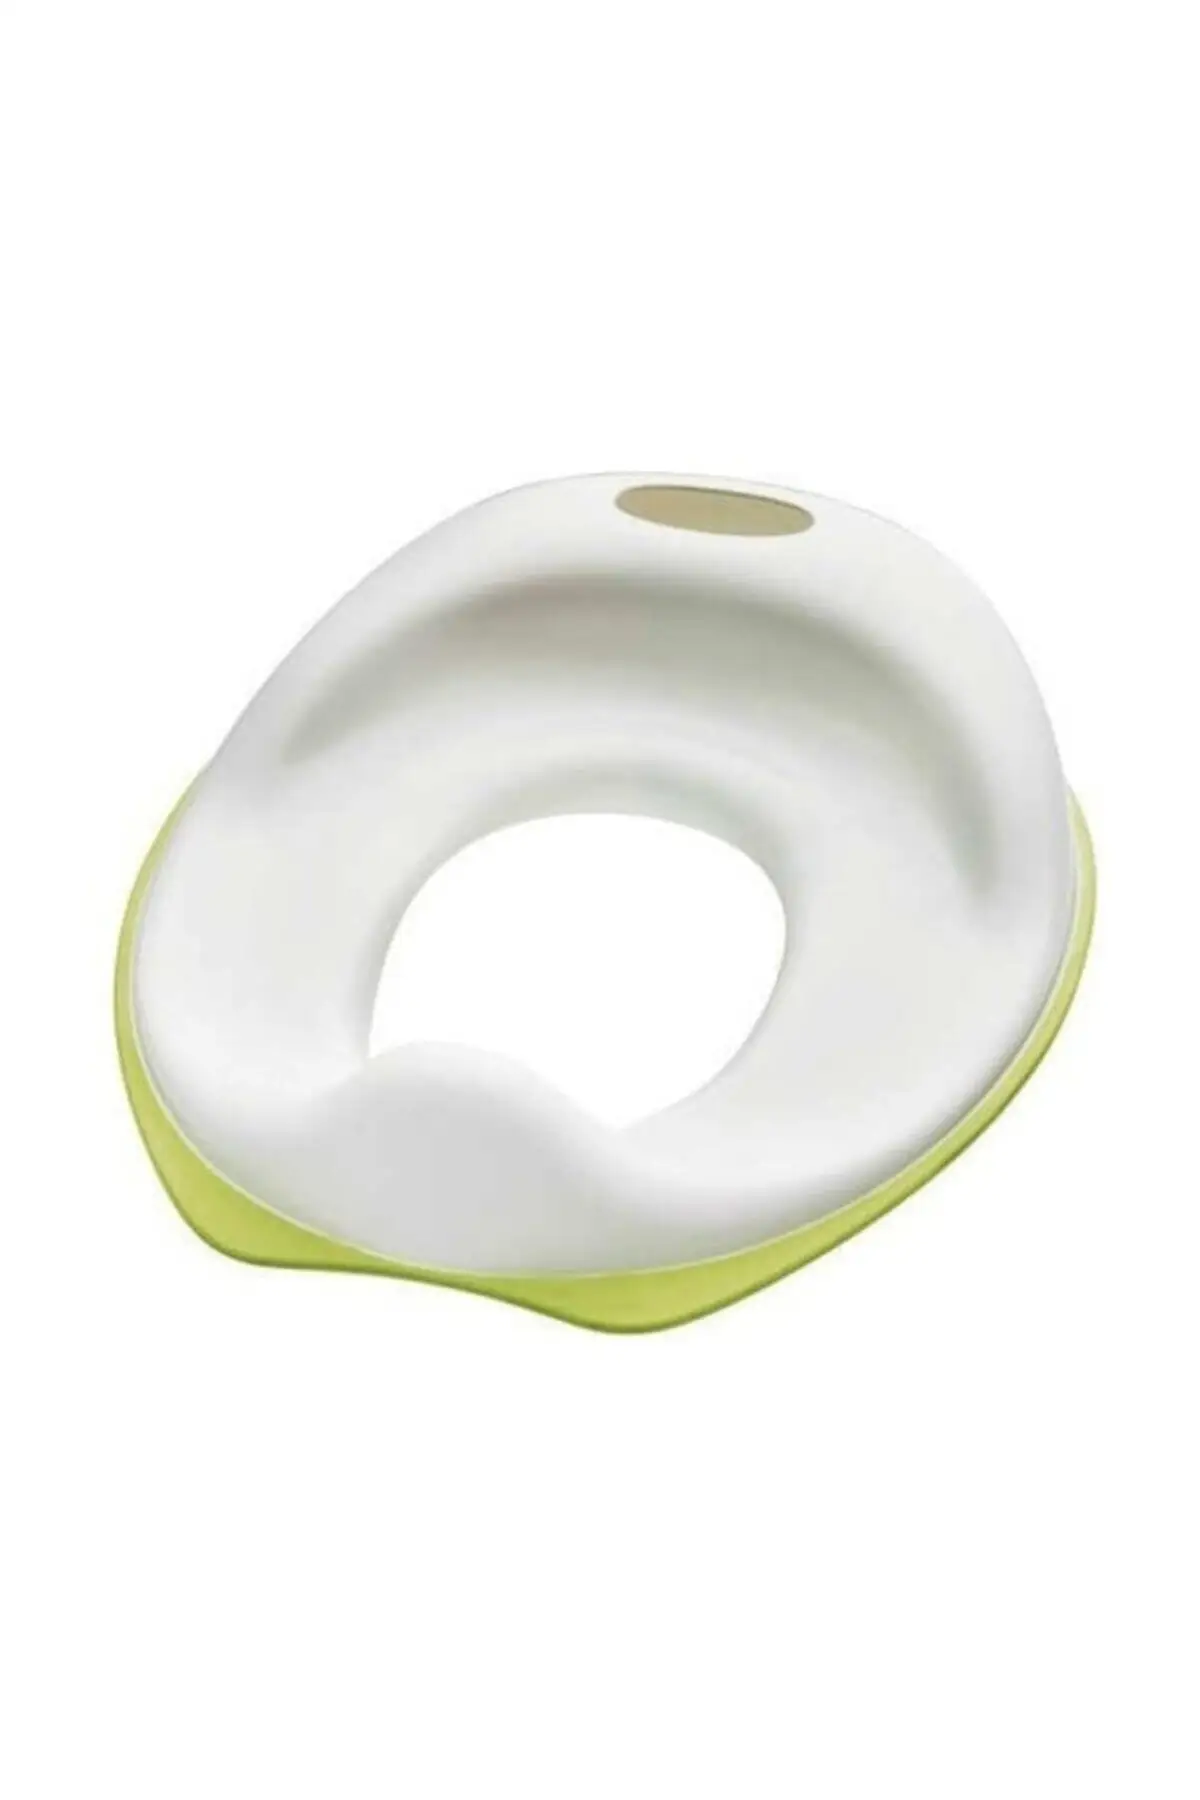 Baby Travel Potty Seat toddler portable Toilet Training seat children urinal cushion pot chair pad /mat